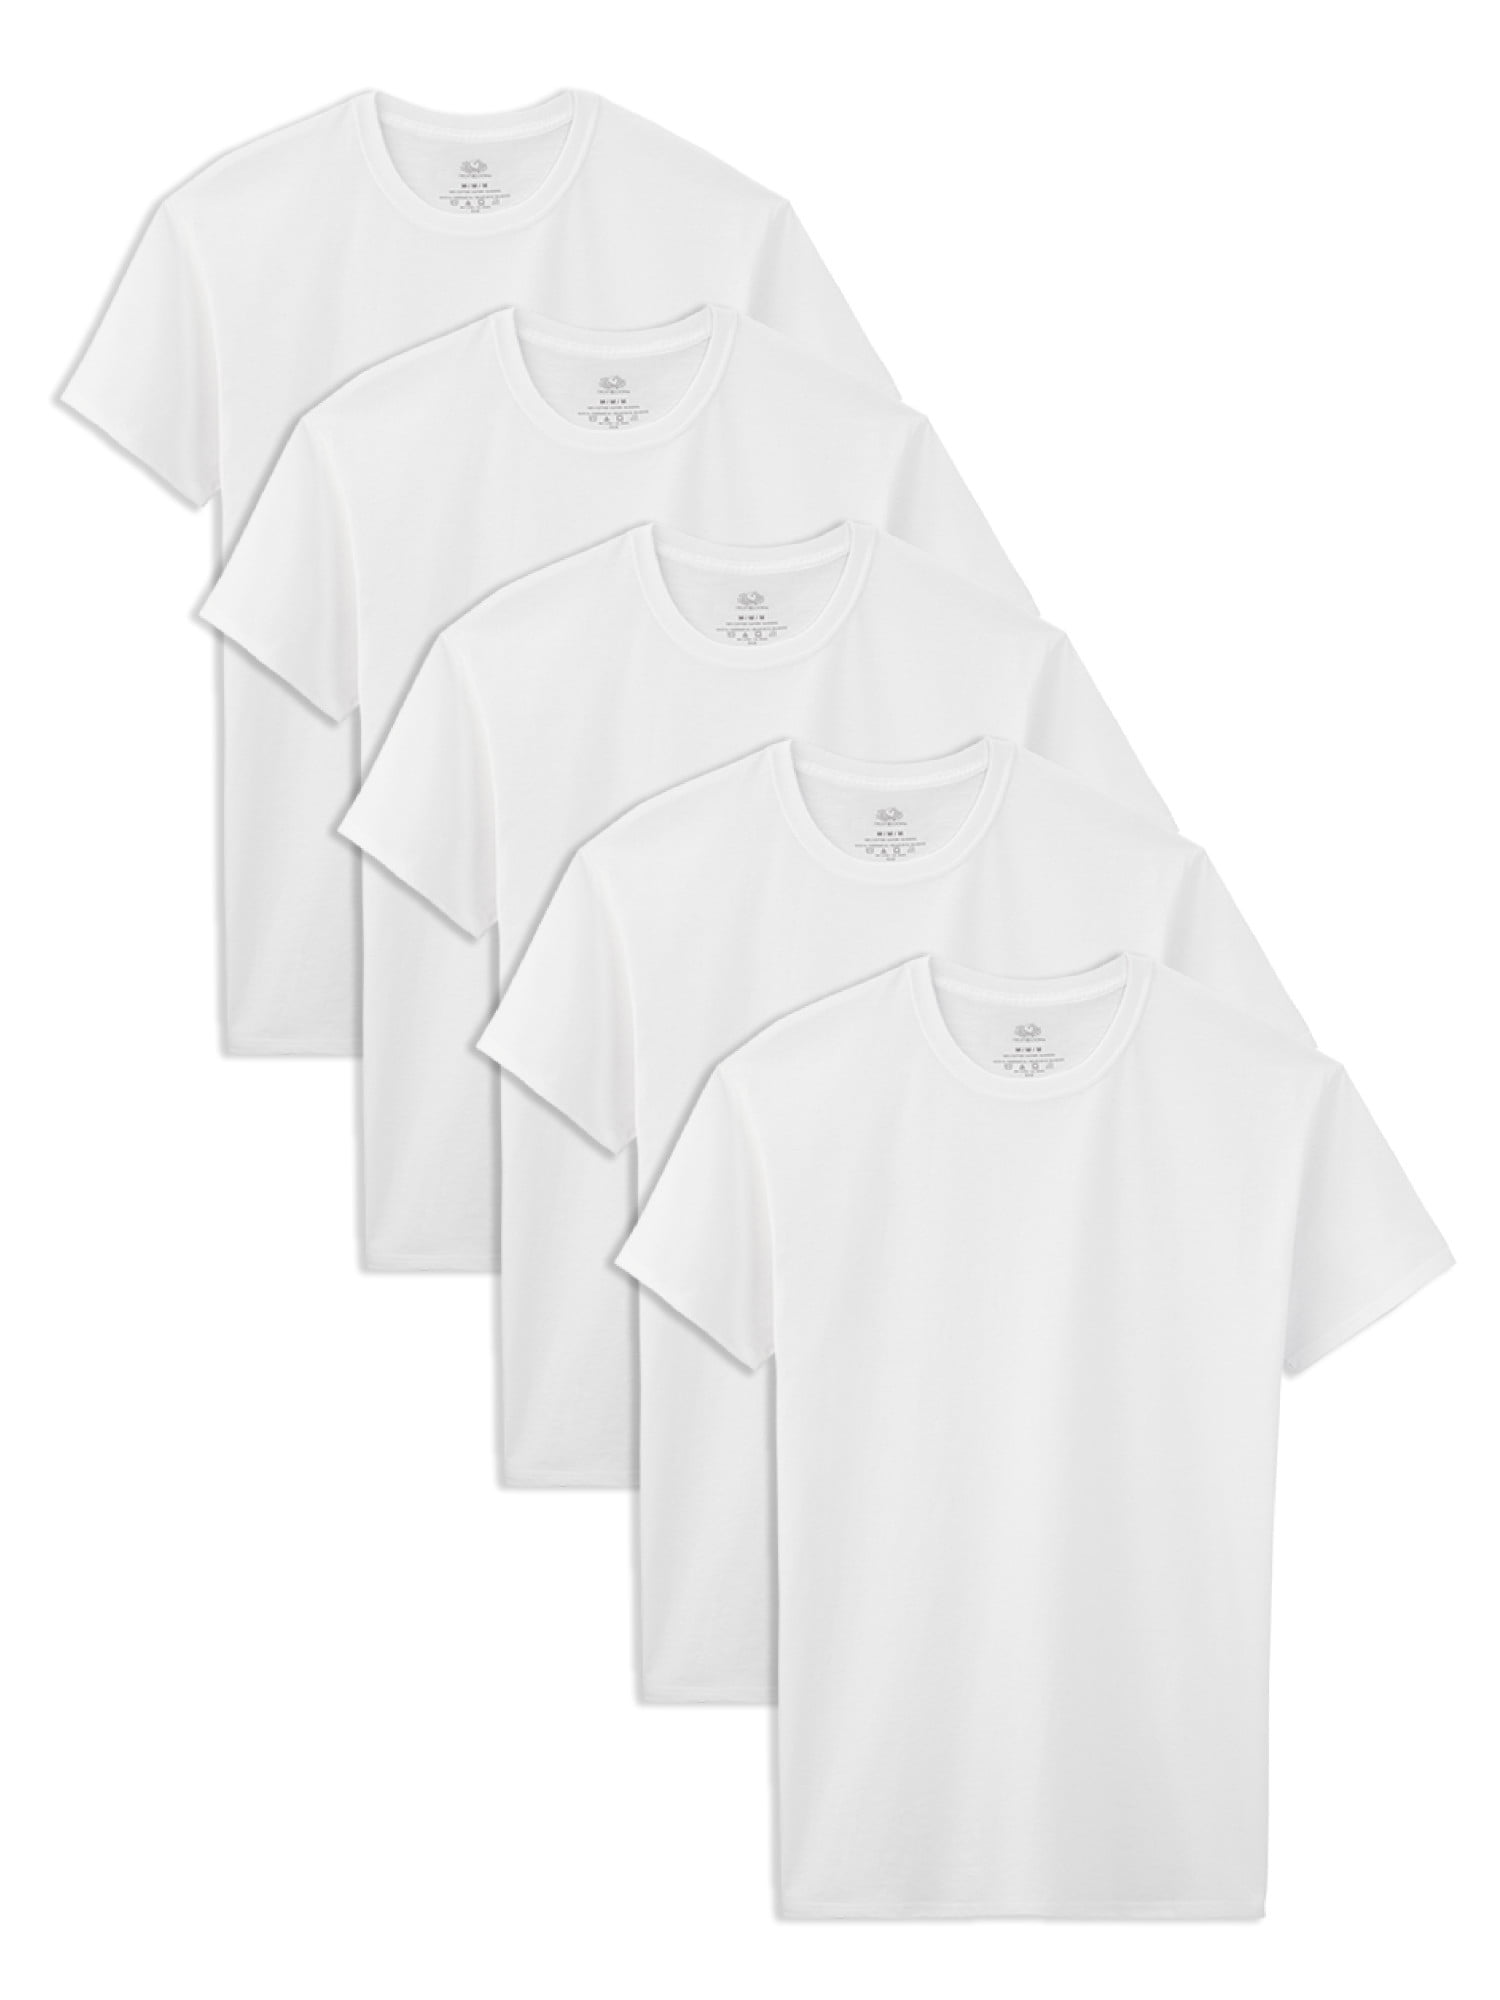 Pack of 5 Fruit of the Loom Boys T-Shirt